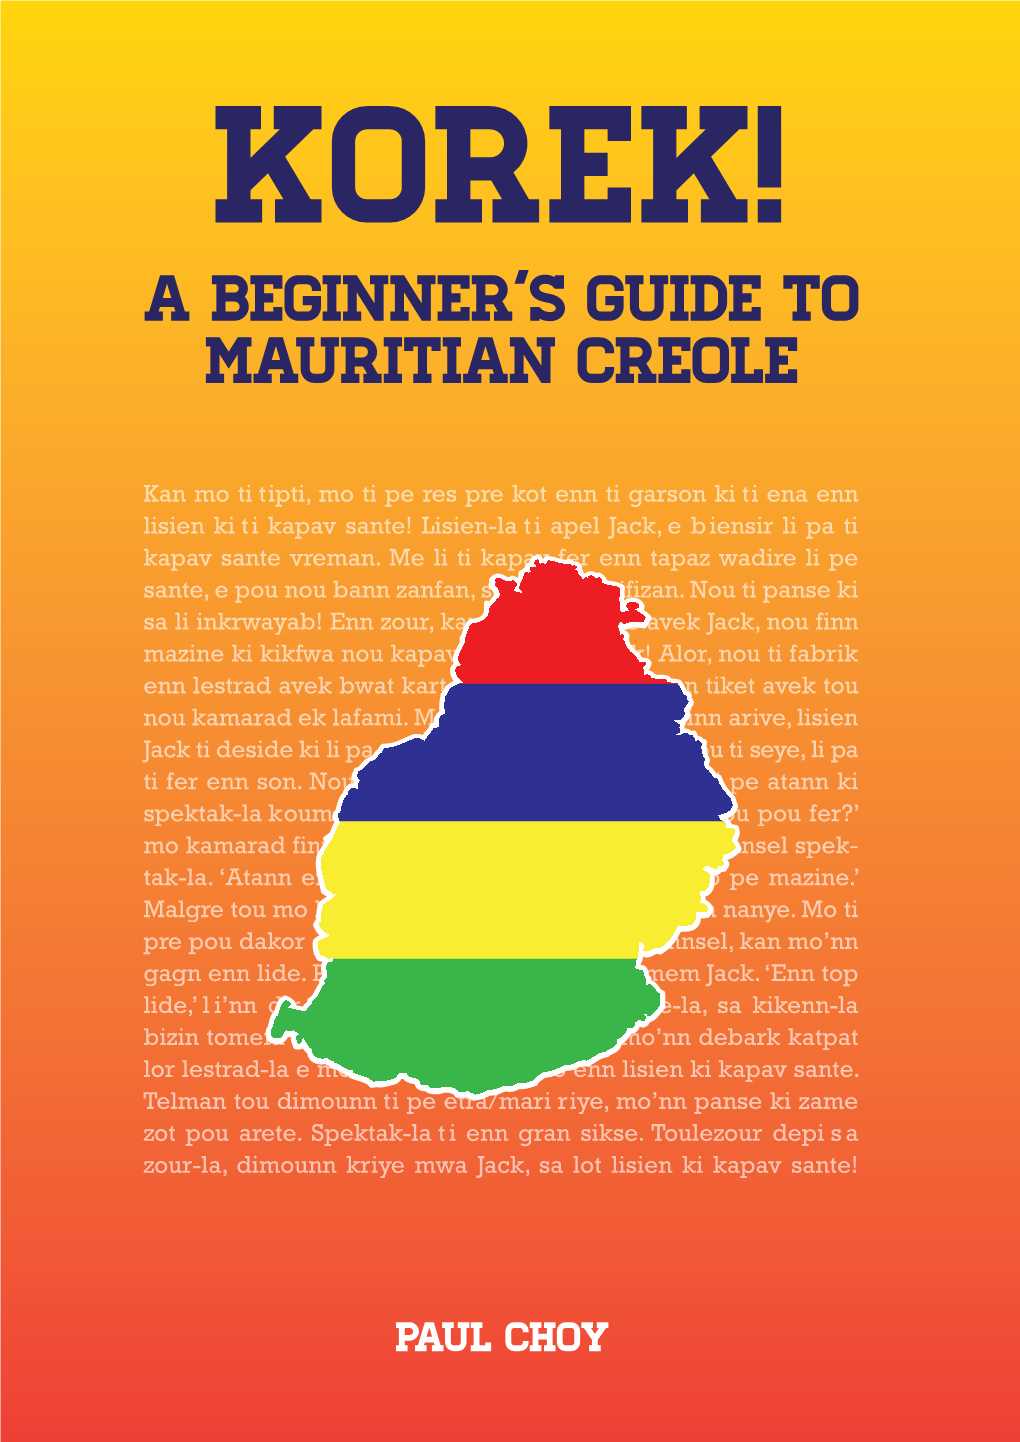 A Beginner's Guide to Mauritian Creole